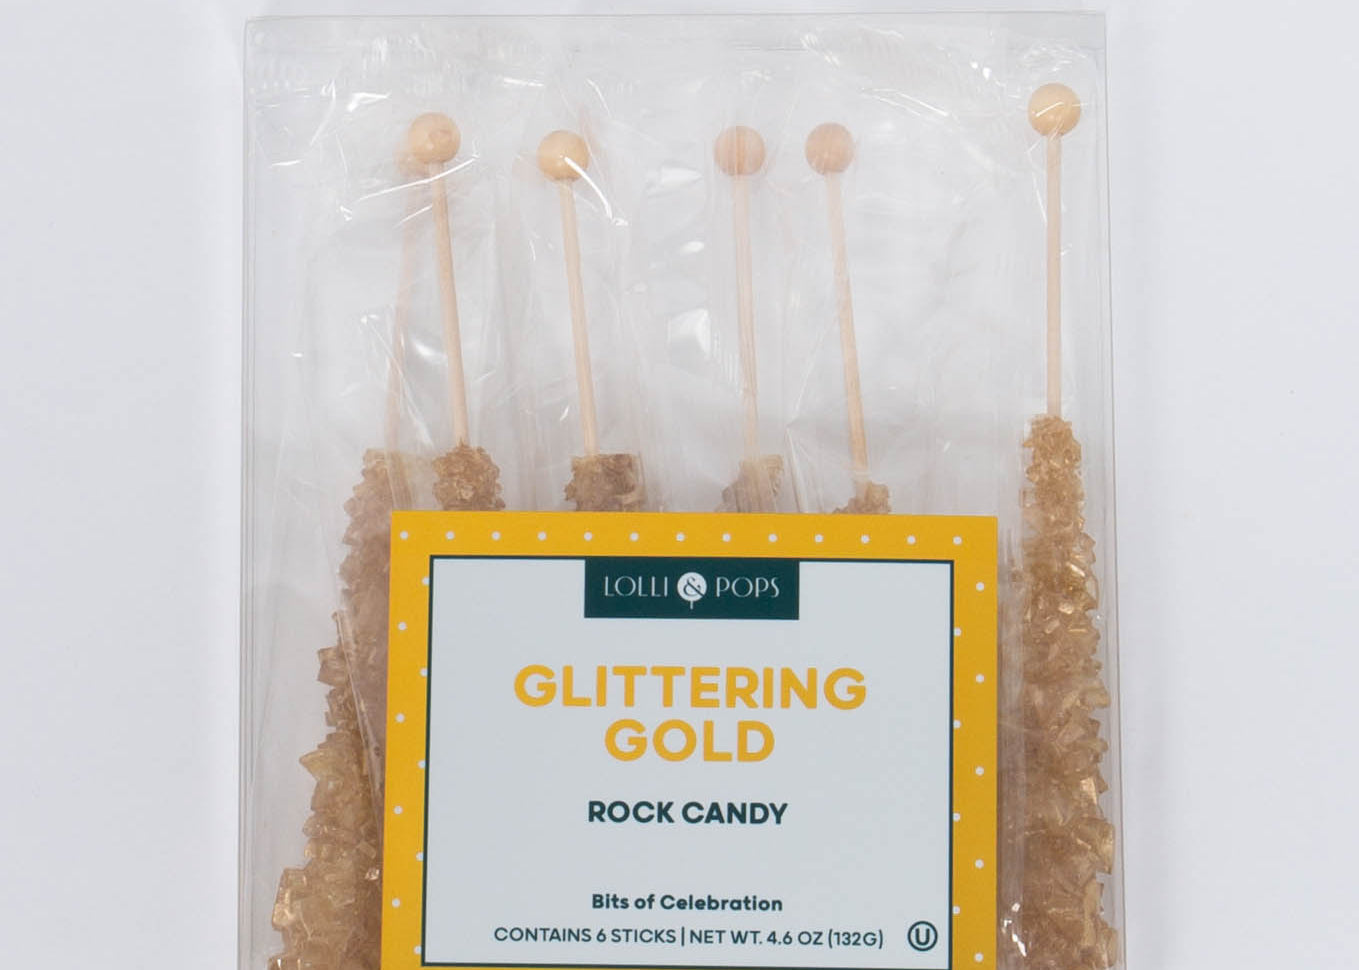 Glittering Gold Rock Candy Pack of six in classic sugar flavor by Lolli & Pops.